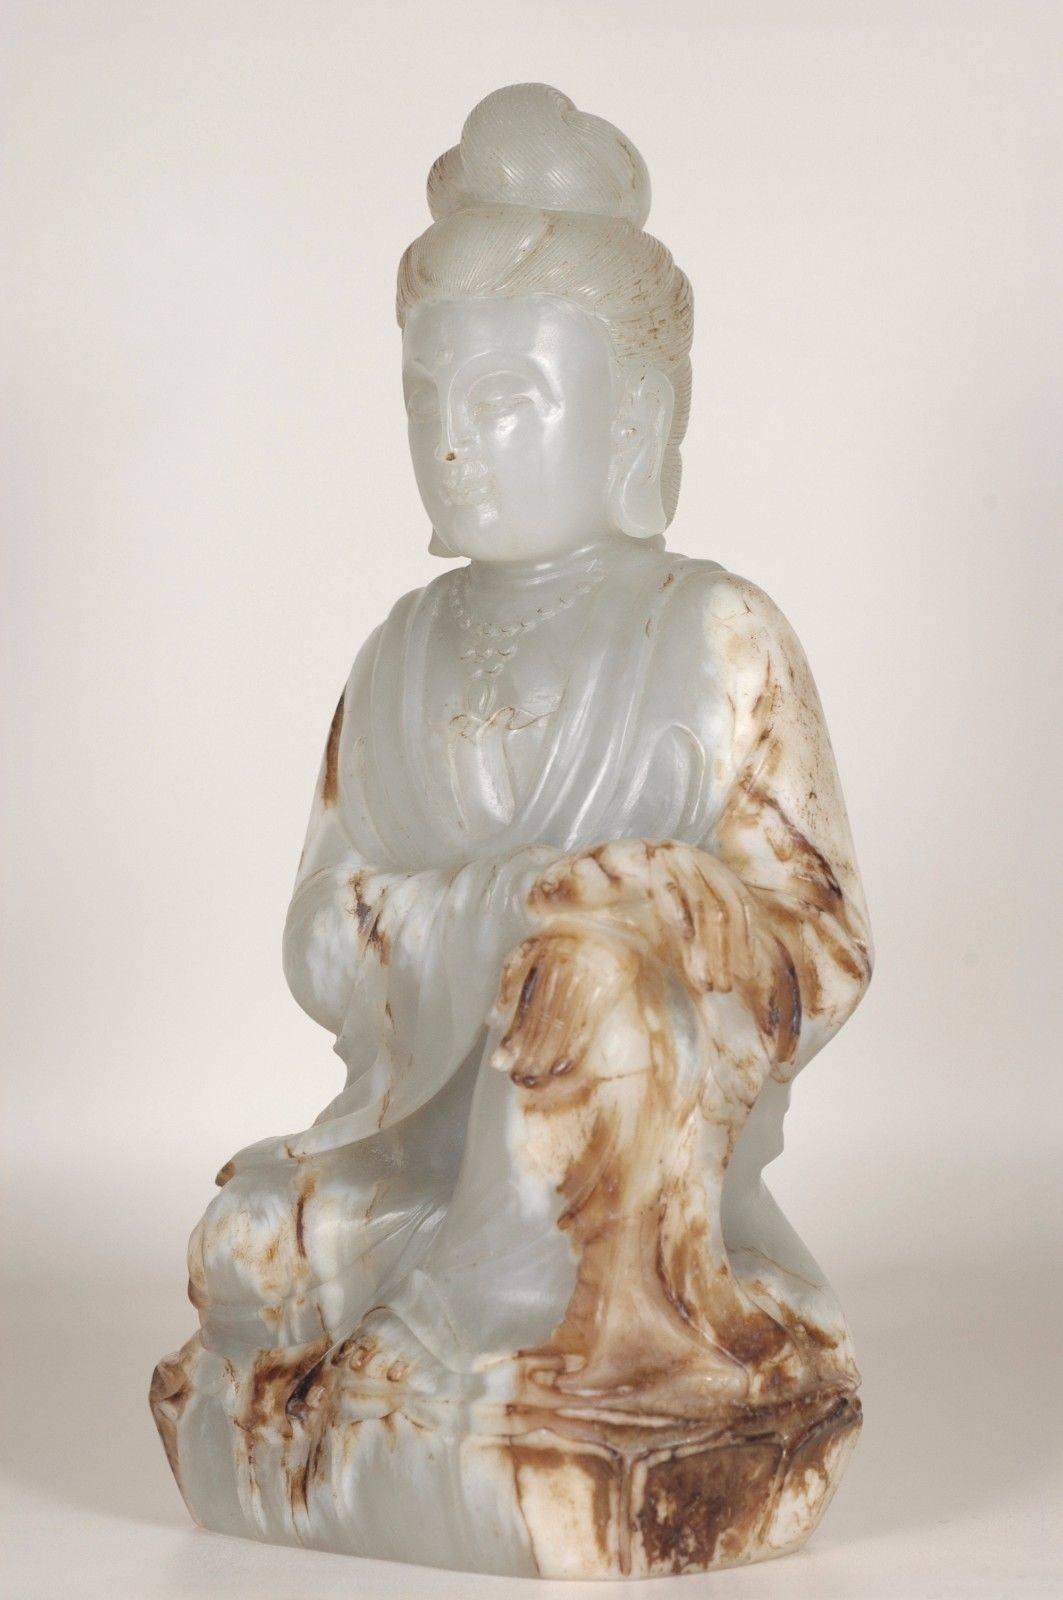 Absolutely beautiful jade Kwan Yin. The jade is of the He Tian Region, the finest in the world.

The statue is carved from an entire block of jade, employing an artistic method which preserves partial original exterior layer of the fine stone.